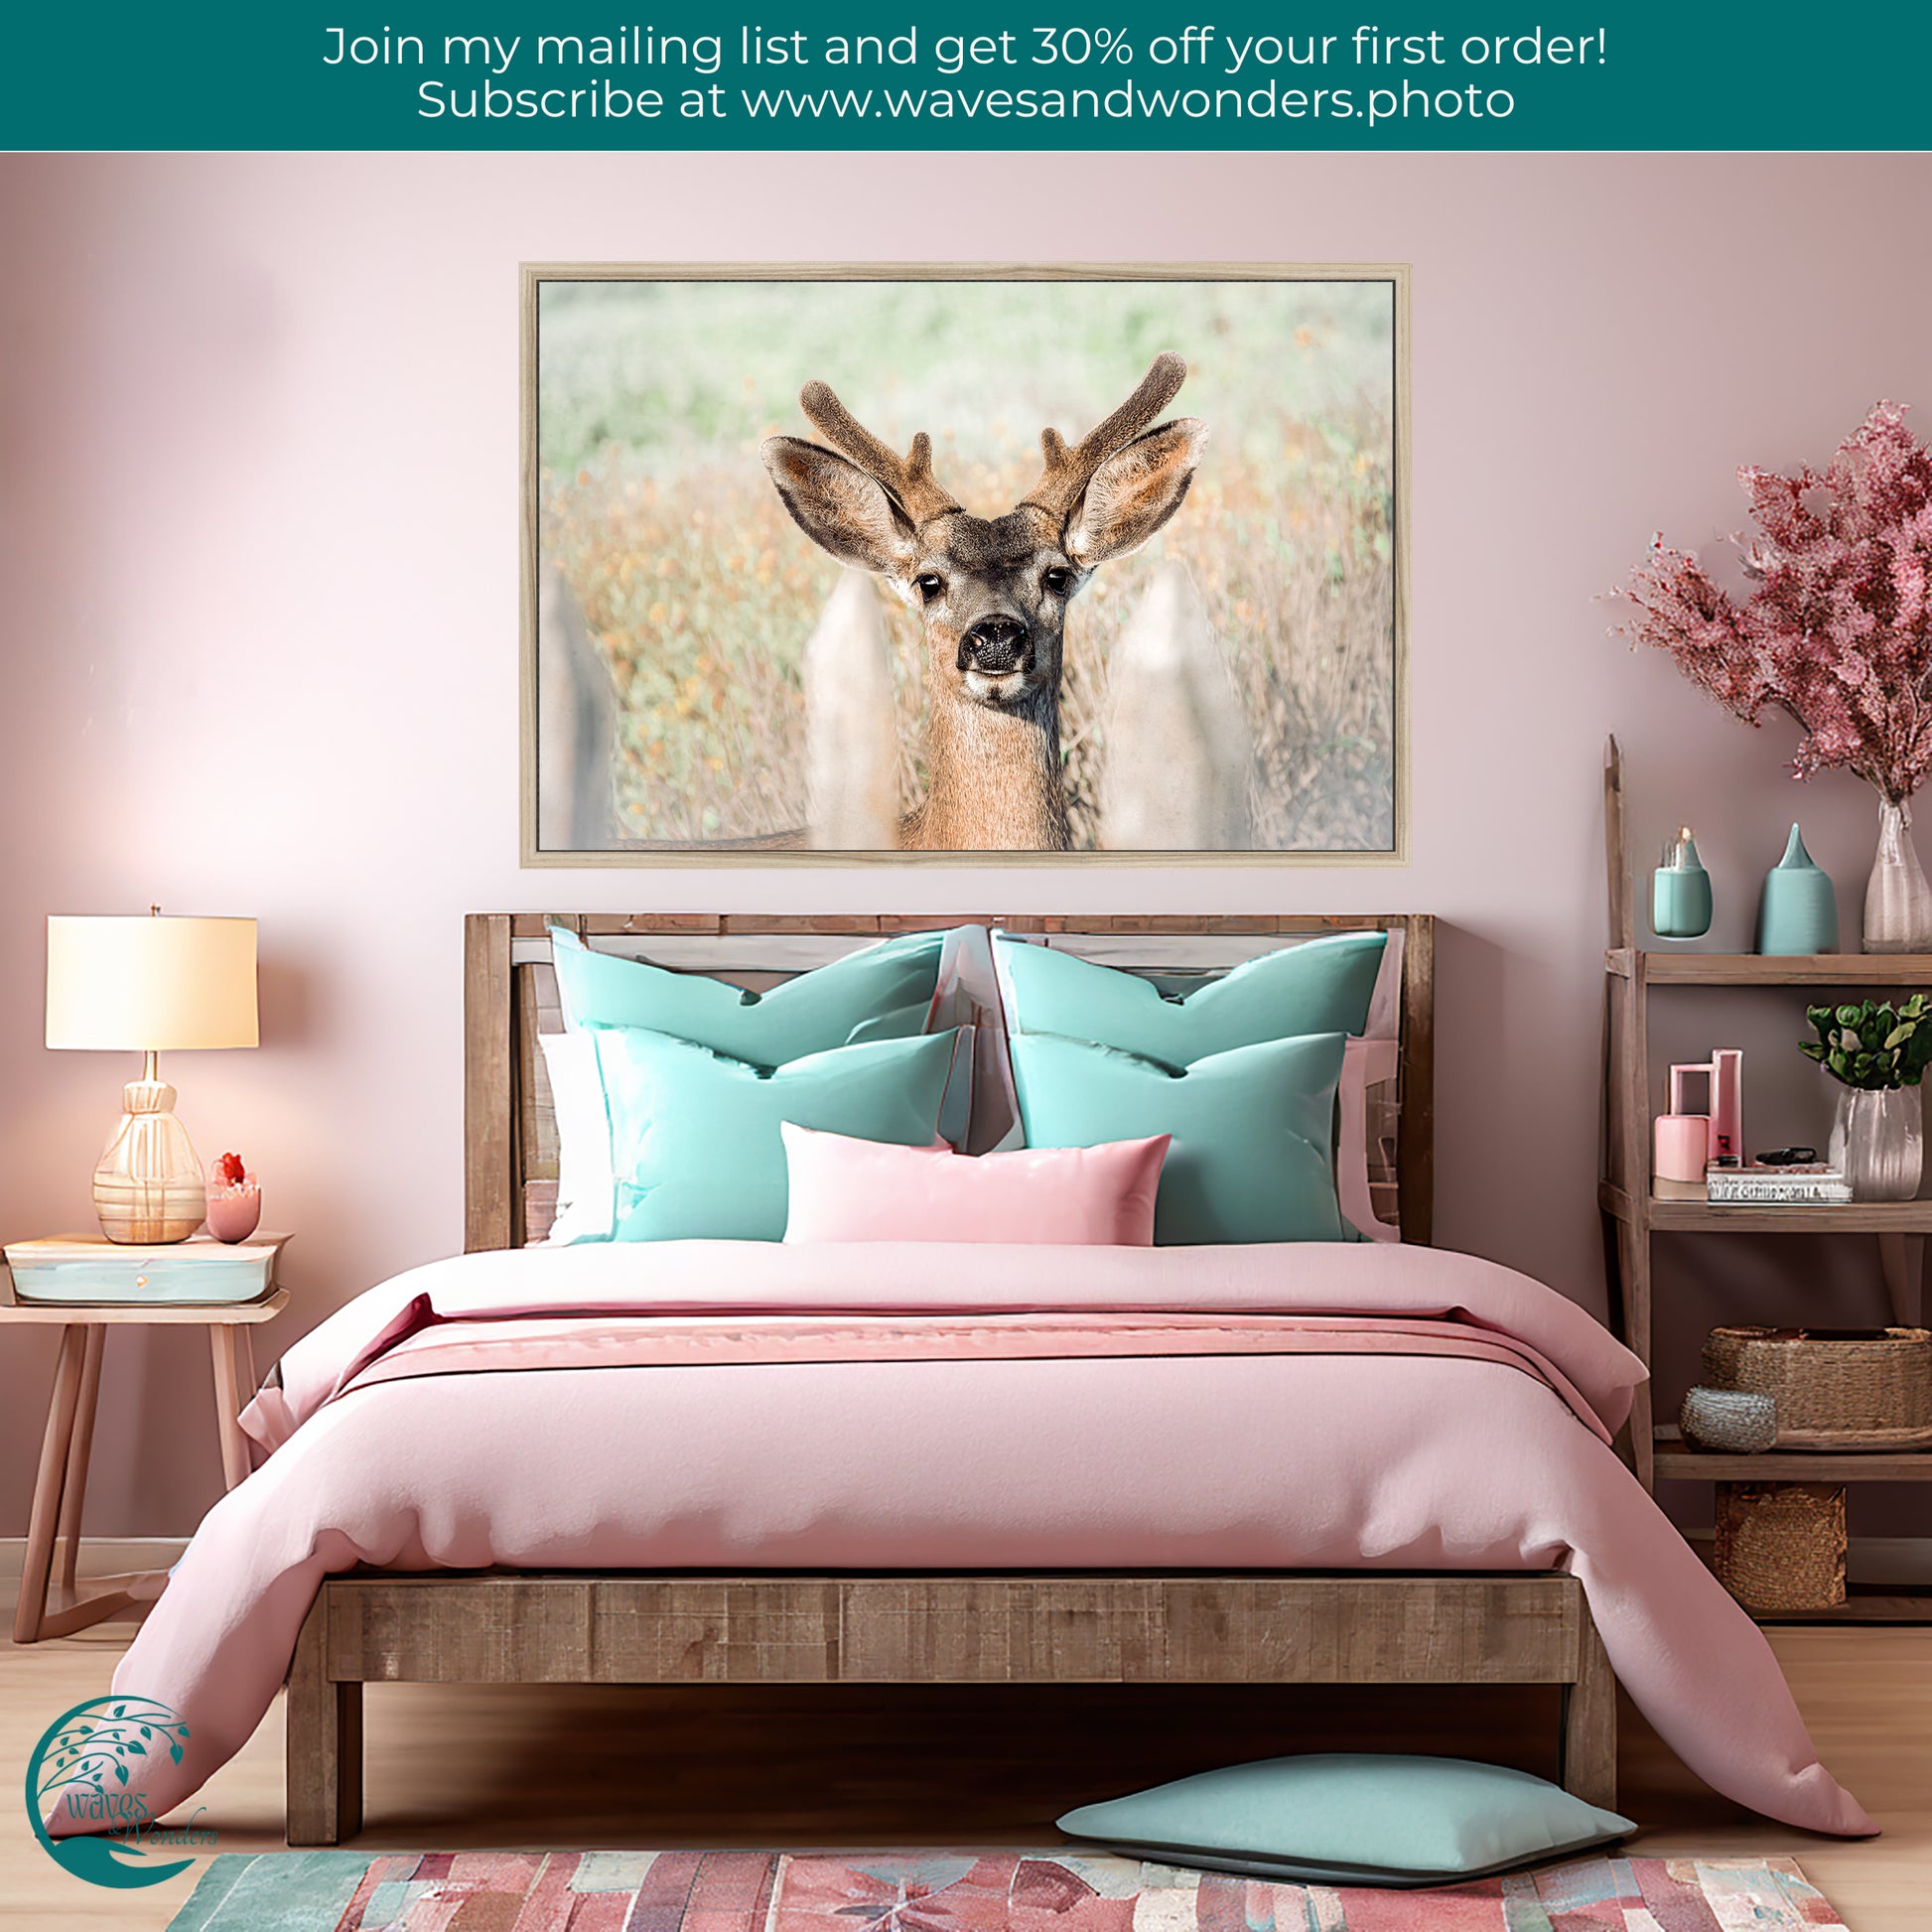 a picture of a deer on a wall above a bed